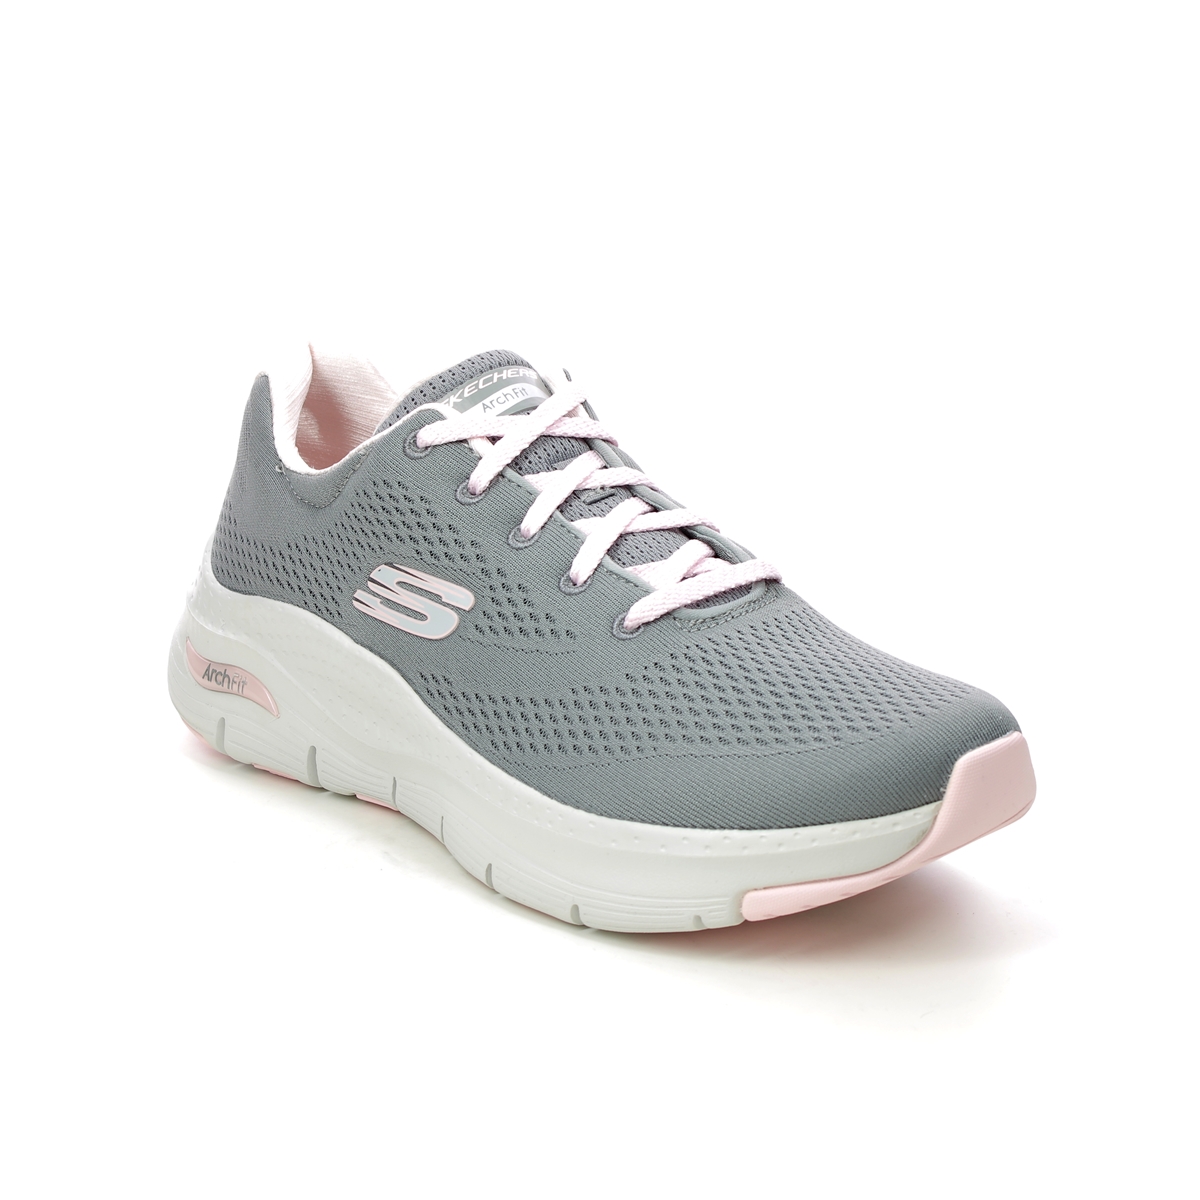 Skechers Appeal Arch Fit GYPK Grey Pink Womens trainers 149057